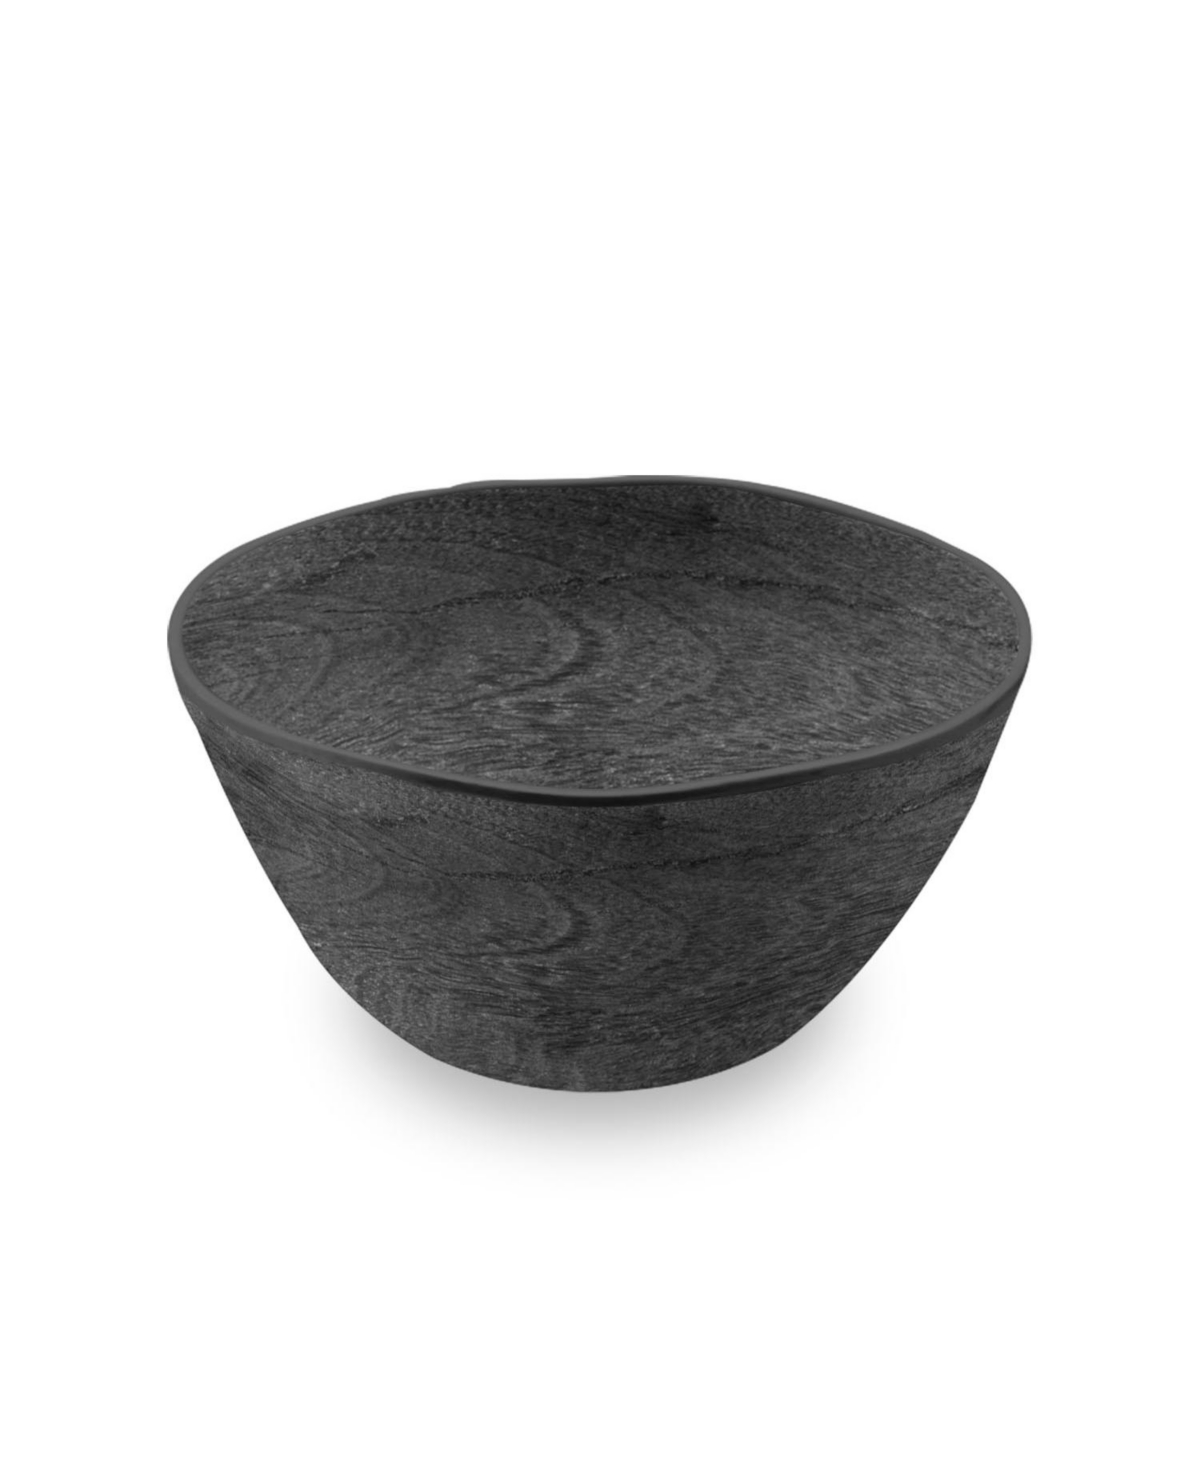 Faux Real Blackened Wood Cereal Bowl, 6" Set of 6 - Blackened Wood Gray